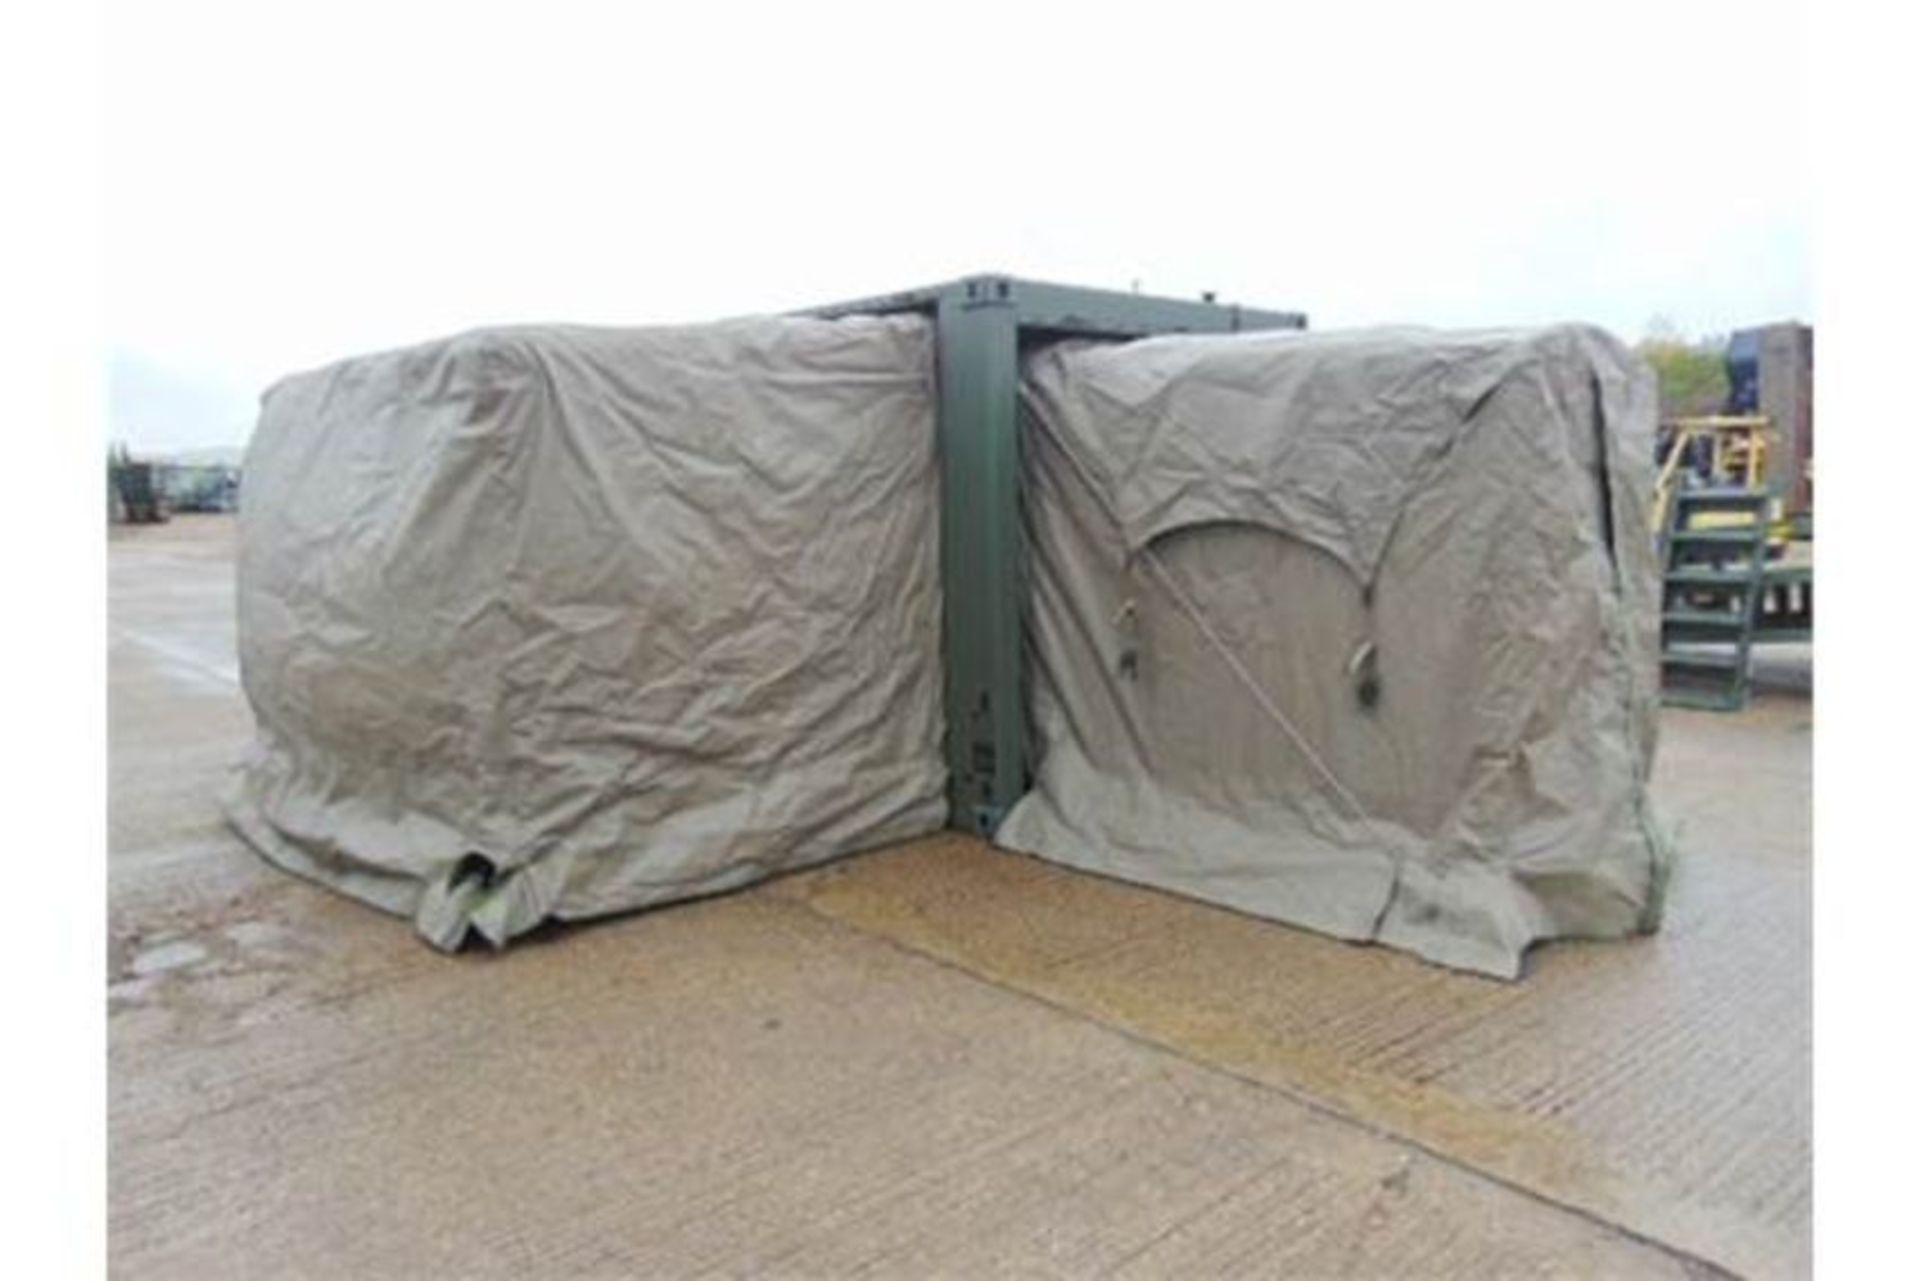 Rapidly Deployable Containerised Insys Ltd Integrated Biological Detection/Decontamination System - Image 28 of 33